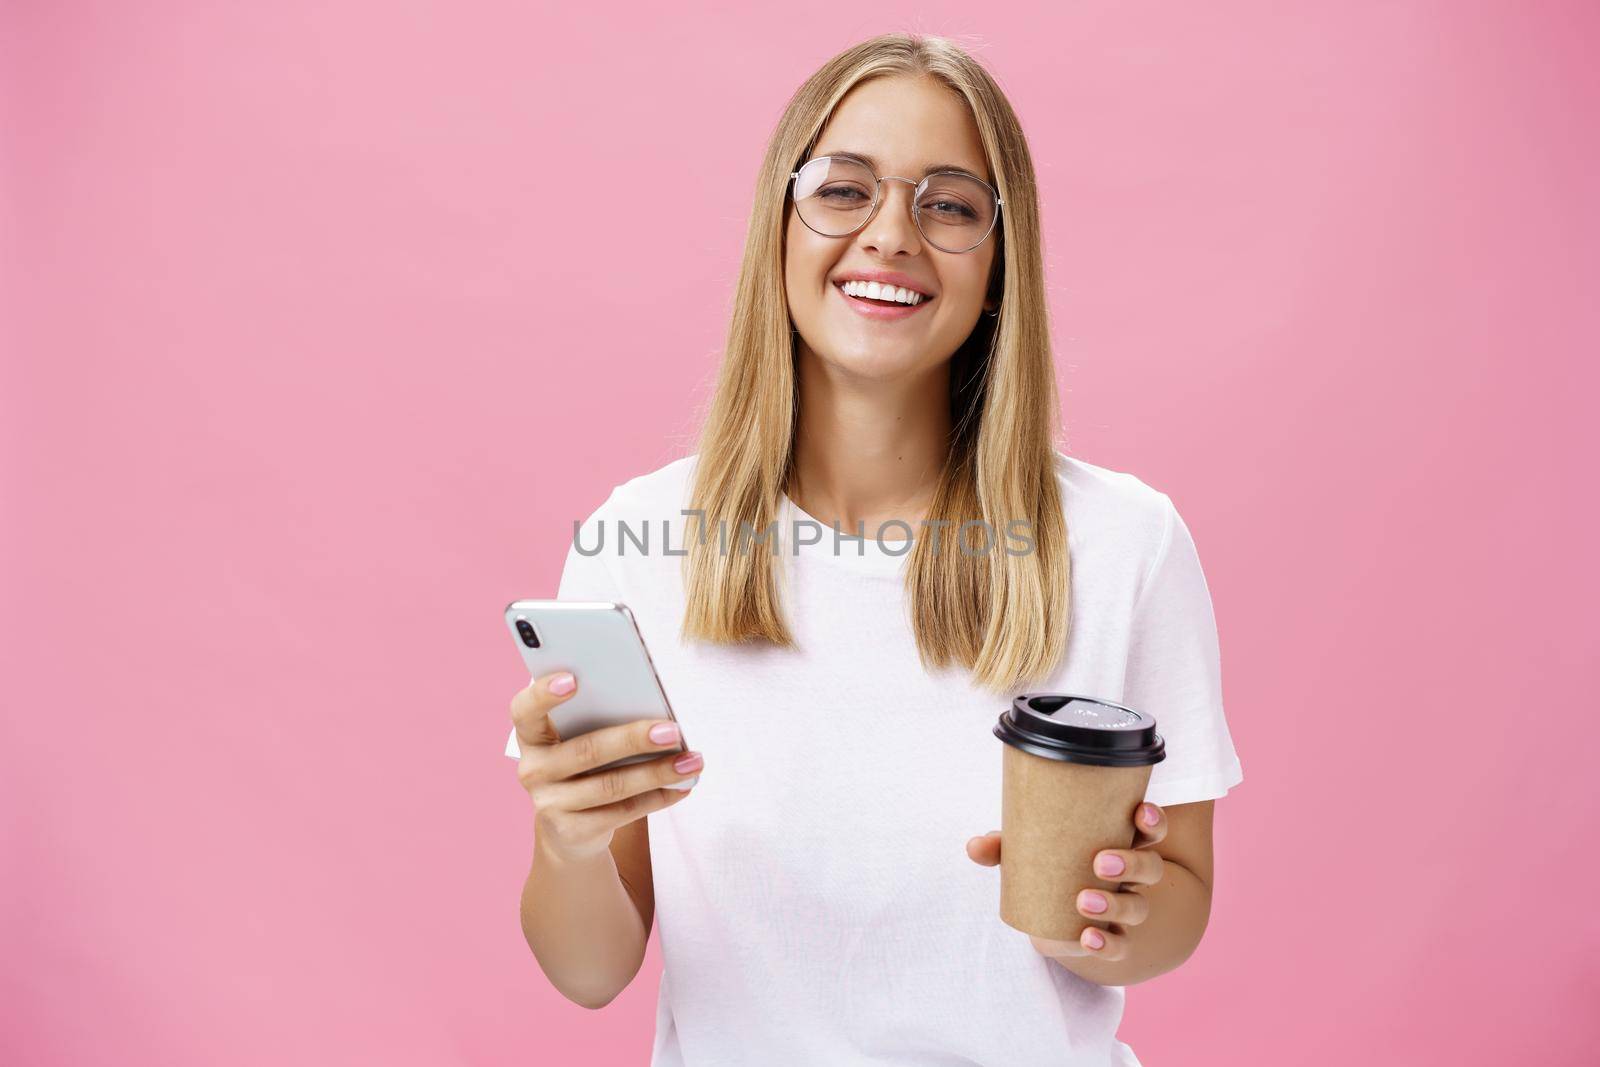 Busy freelancer sipping coffee and working via smartphone talking to clients while sitting in cafe or coworking place, laughing joyfully at camera with broad smile holding paper cup and cellphone. Van life, lifestyle, technology and digital nomad concept